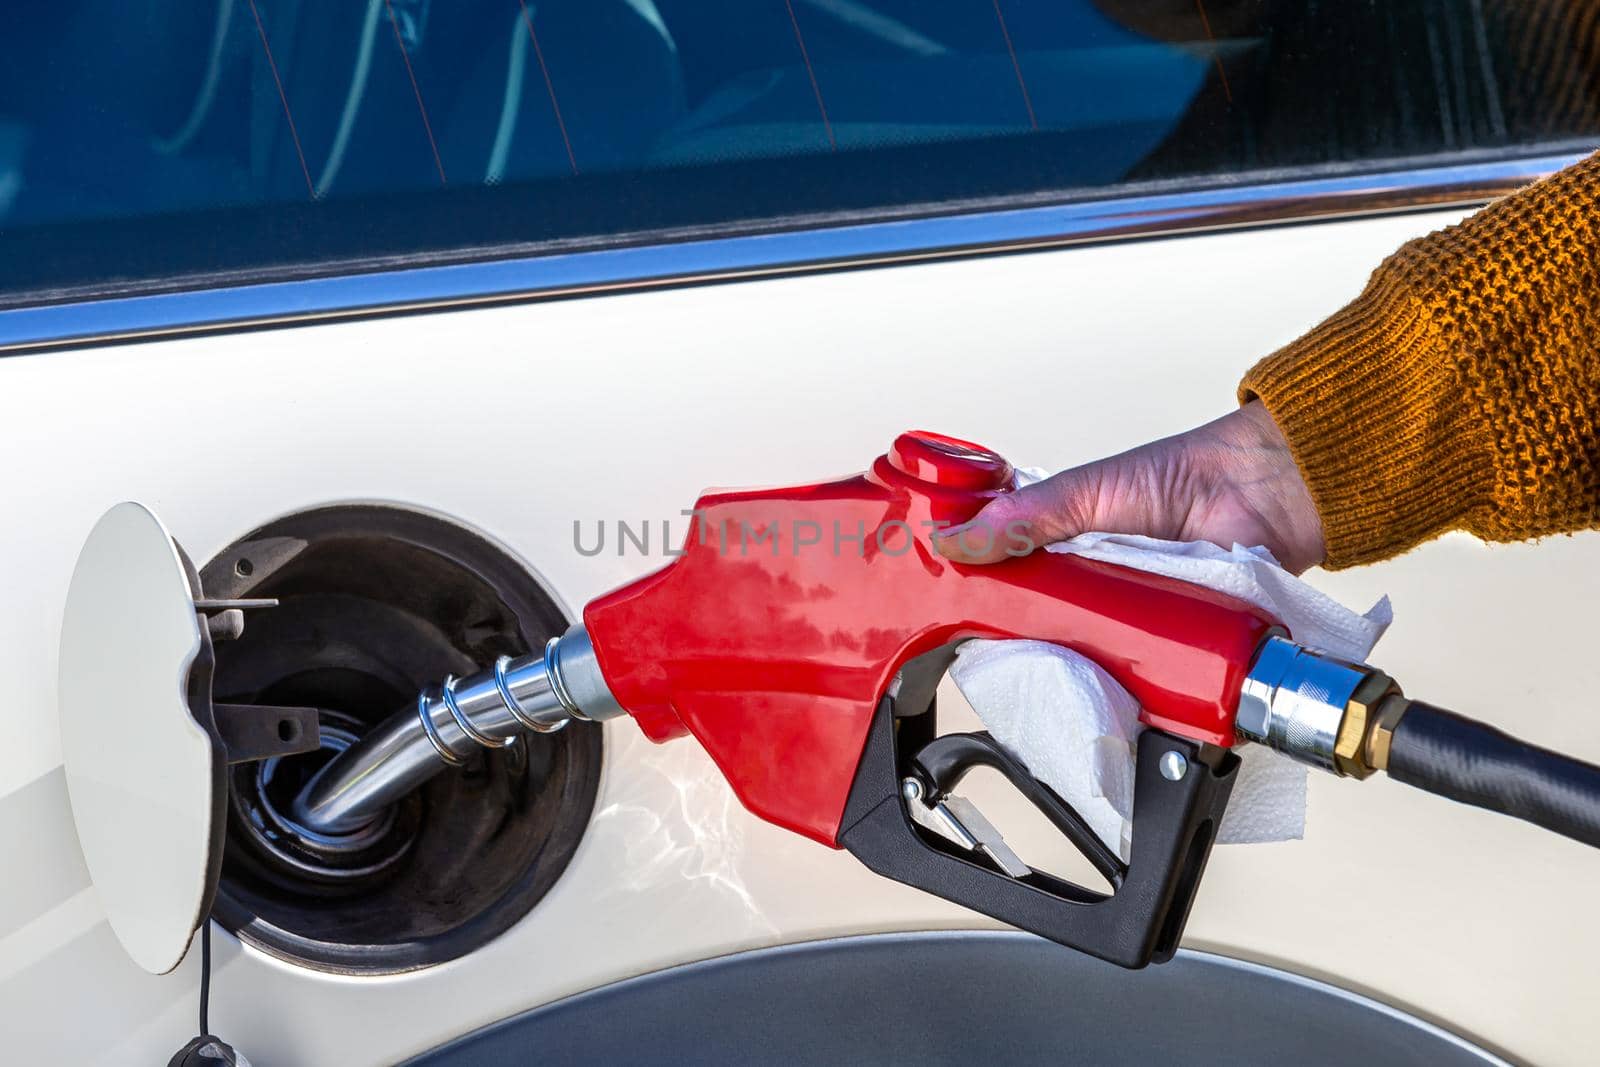 fuel price increase - Refueling a close-up car by JPC-PROD